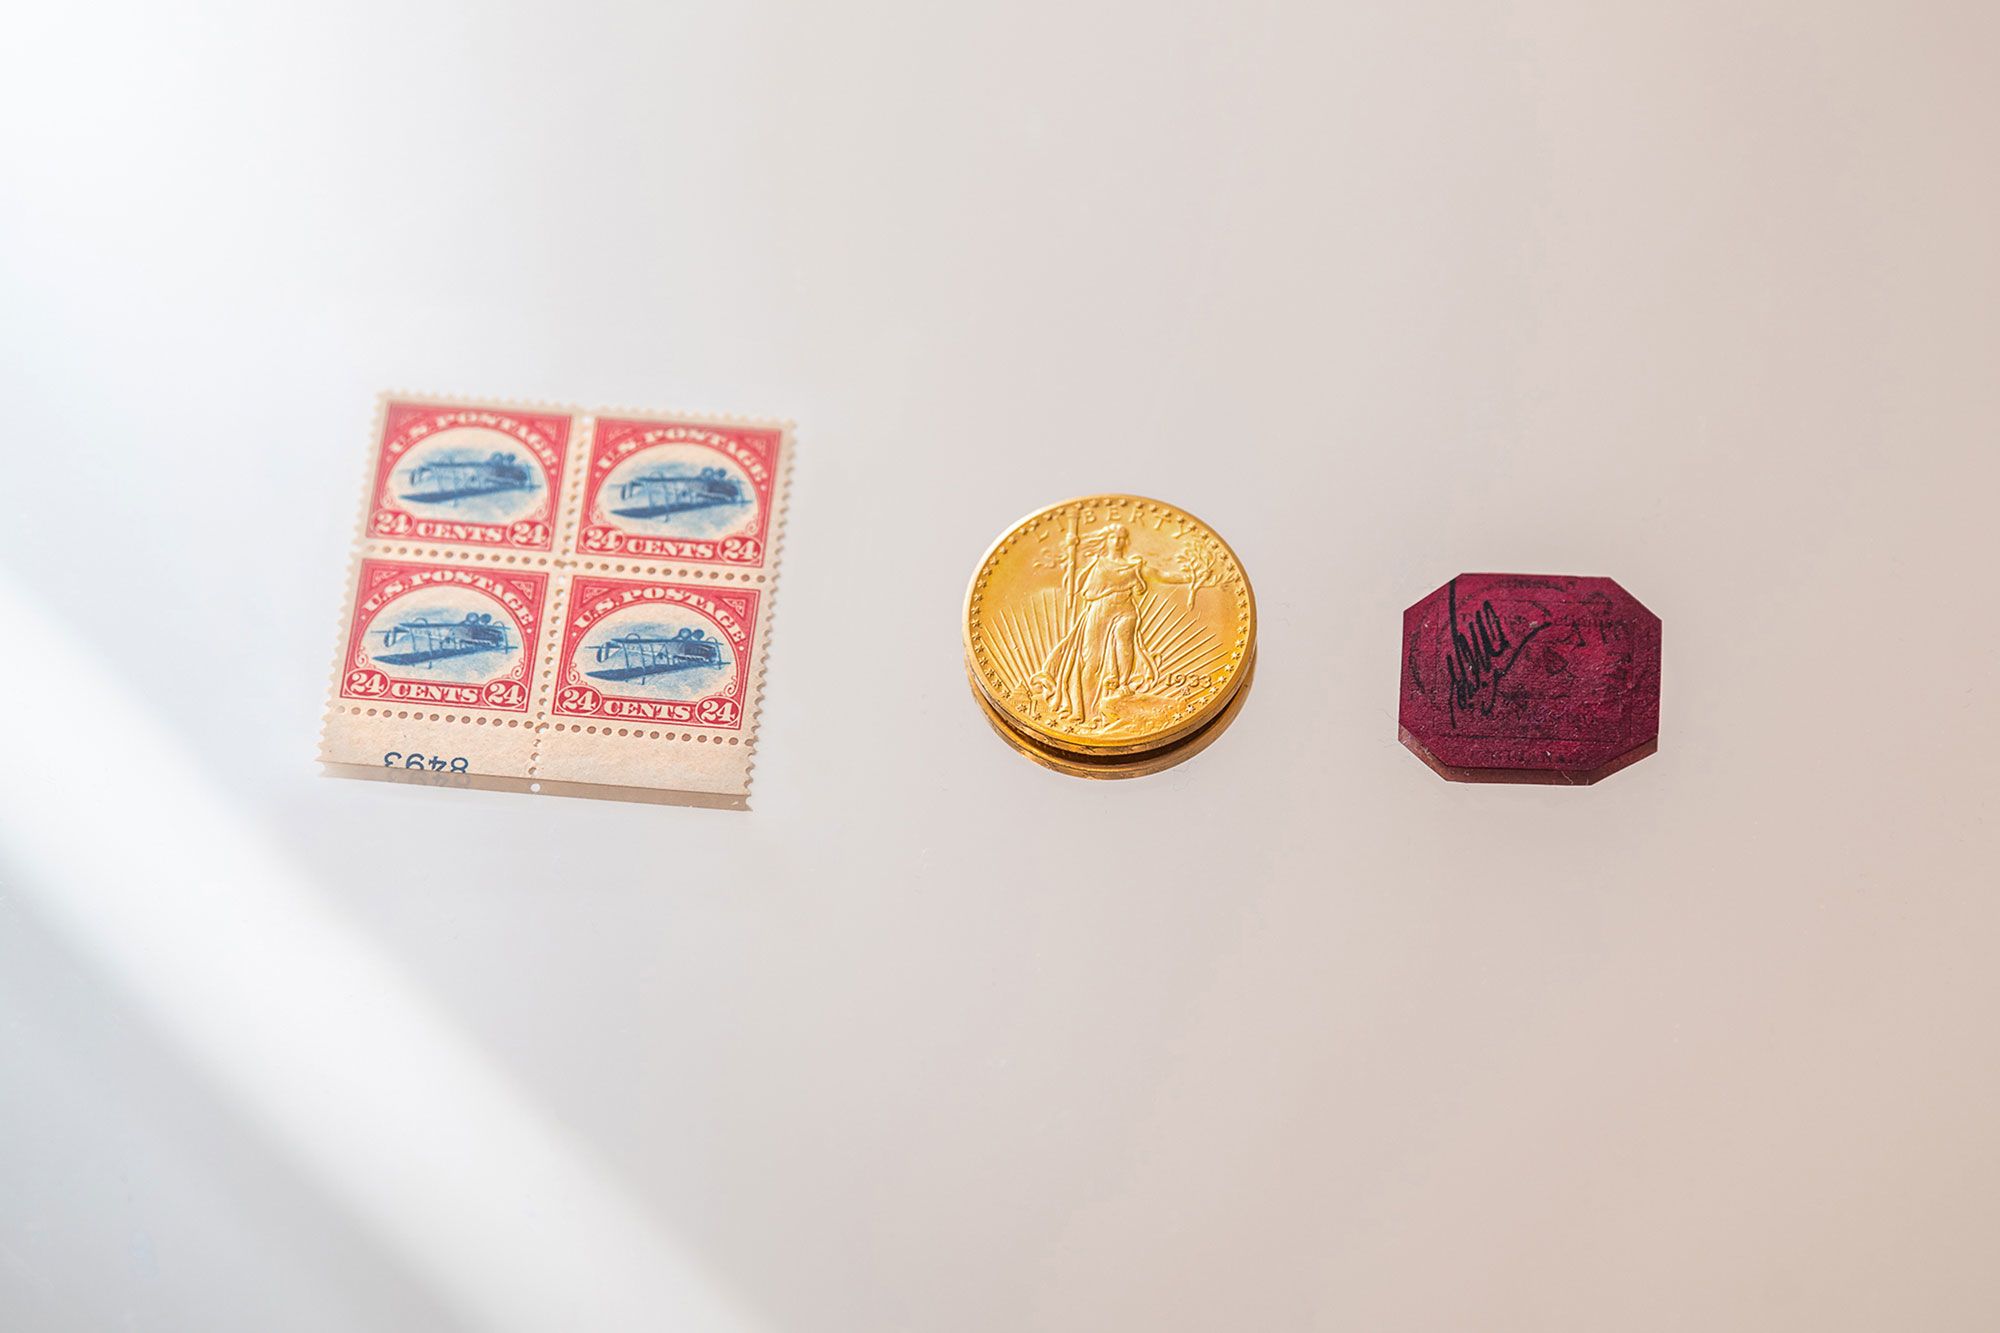 Are My Postage Stamps Worth Anything? - Auctions Work